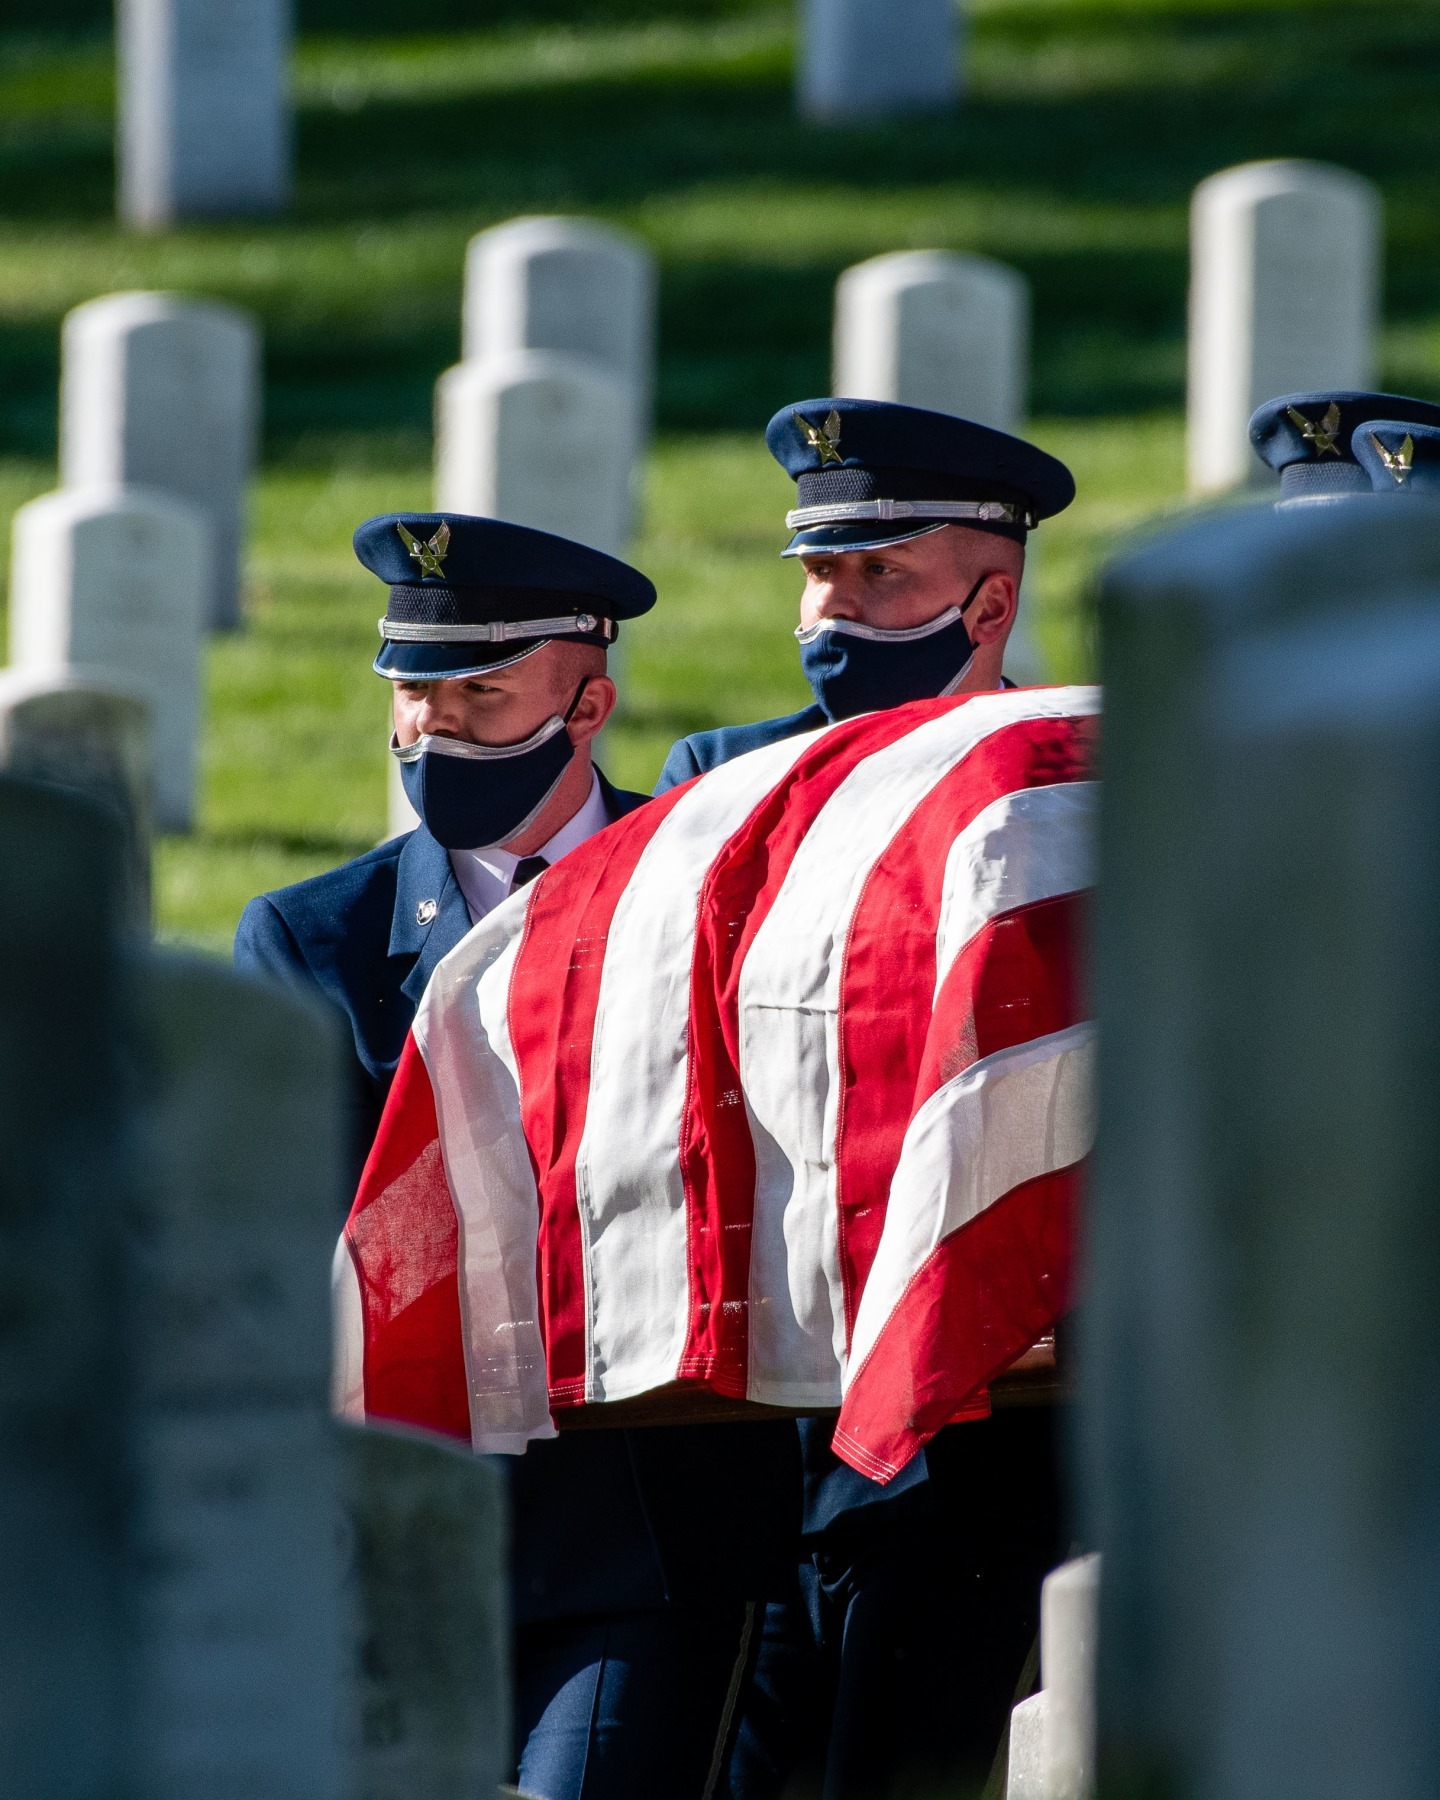 Members of the US Air Force Honor Guard carry a casket through Section 25 of Arlington National Cemetery.